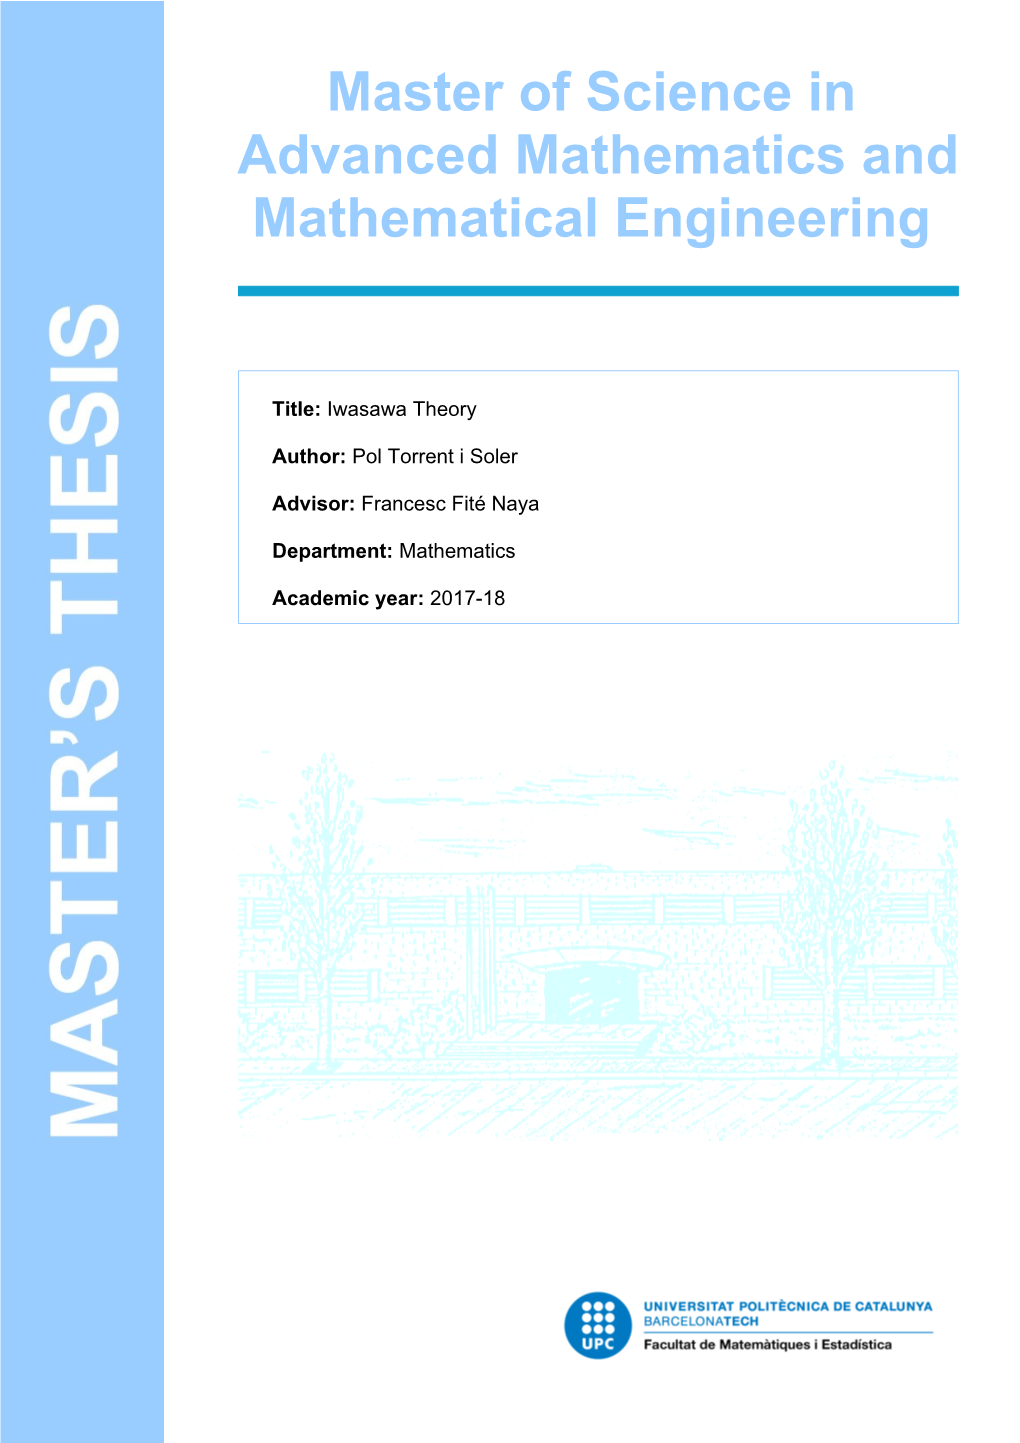 Master of Science in Advanced Mathematics and Mathematical Engineering